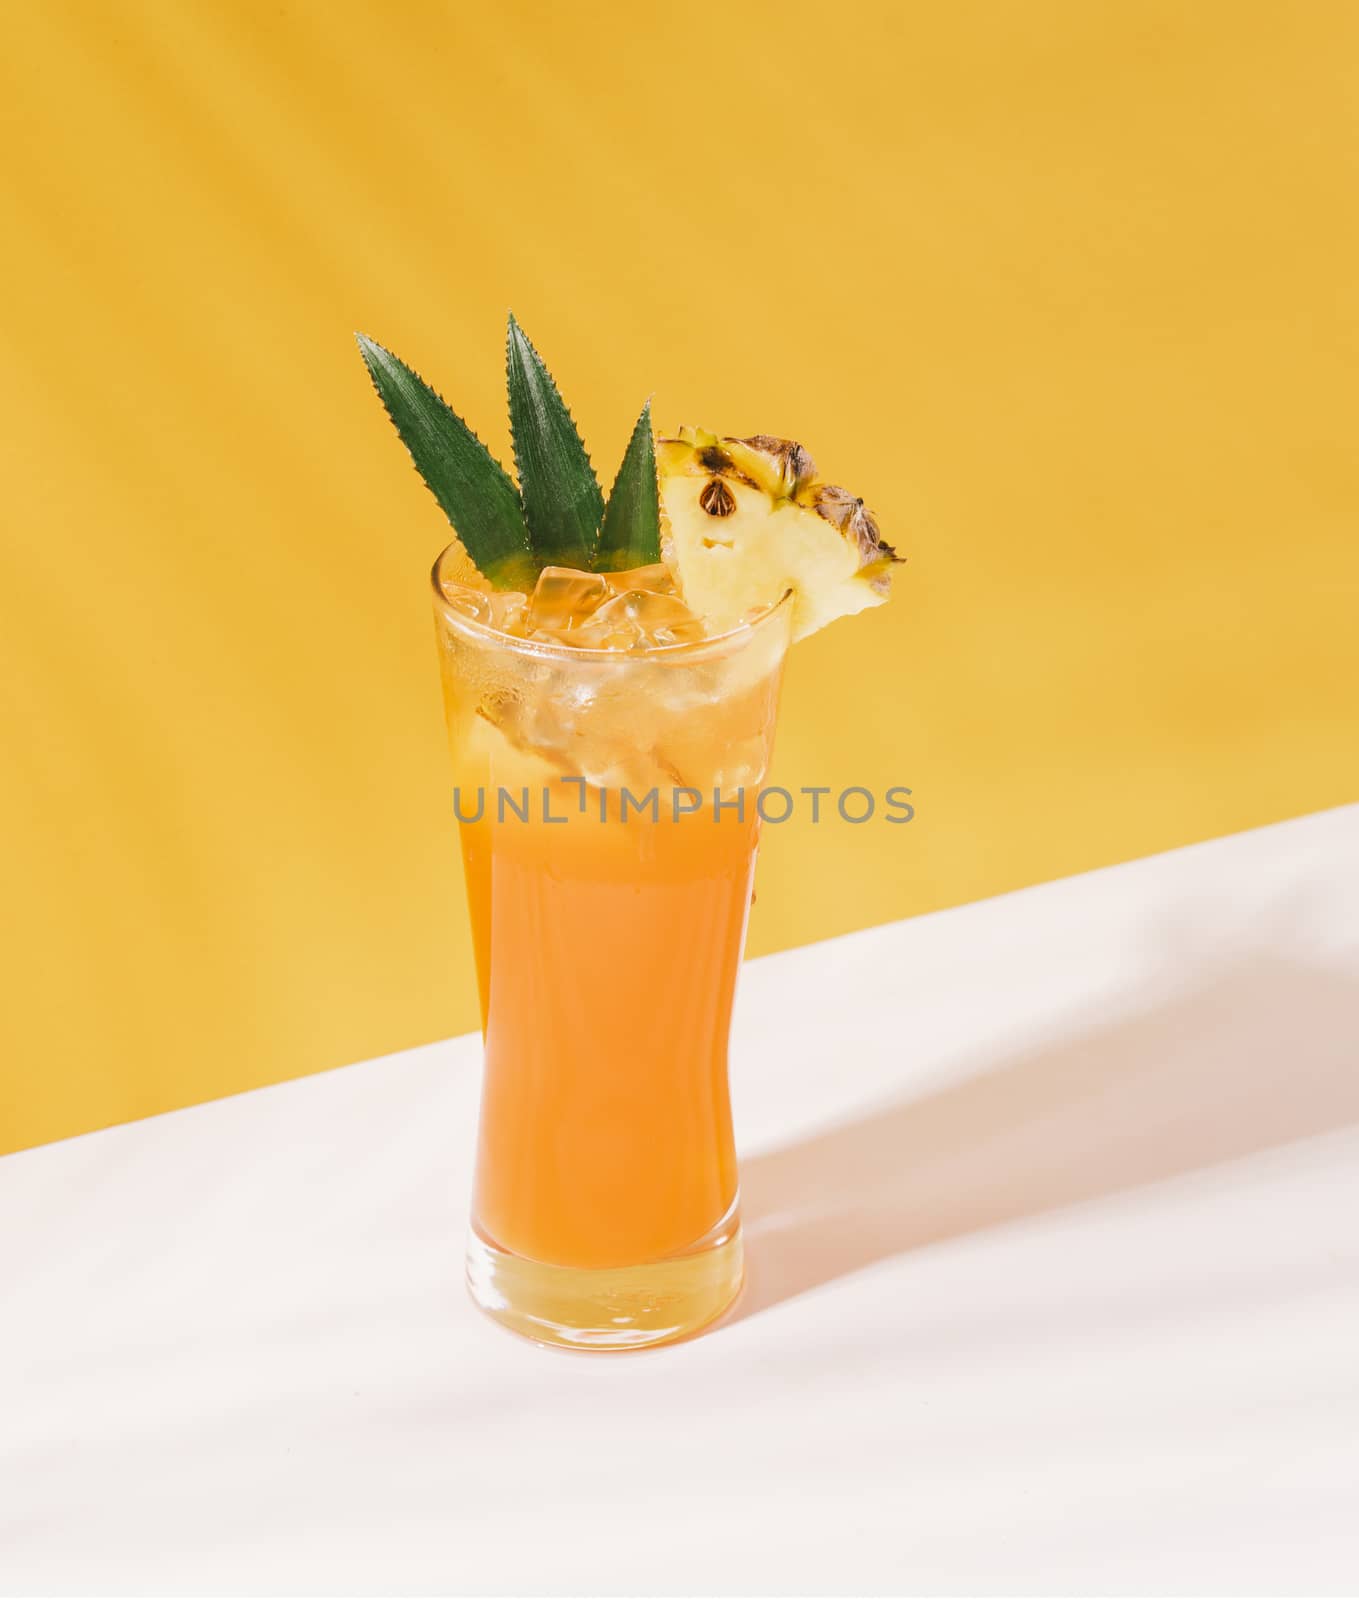 iced pineapple punch cocktail in glass on orange background. summer drink.